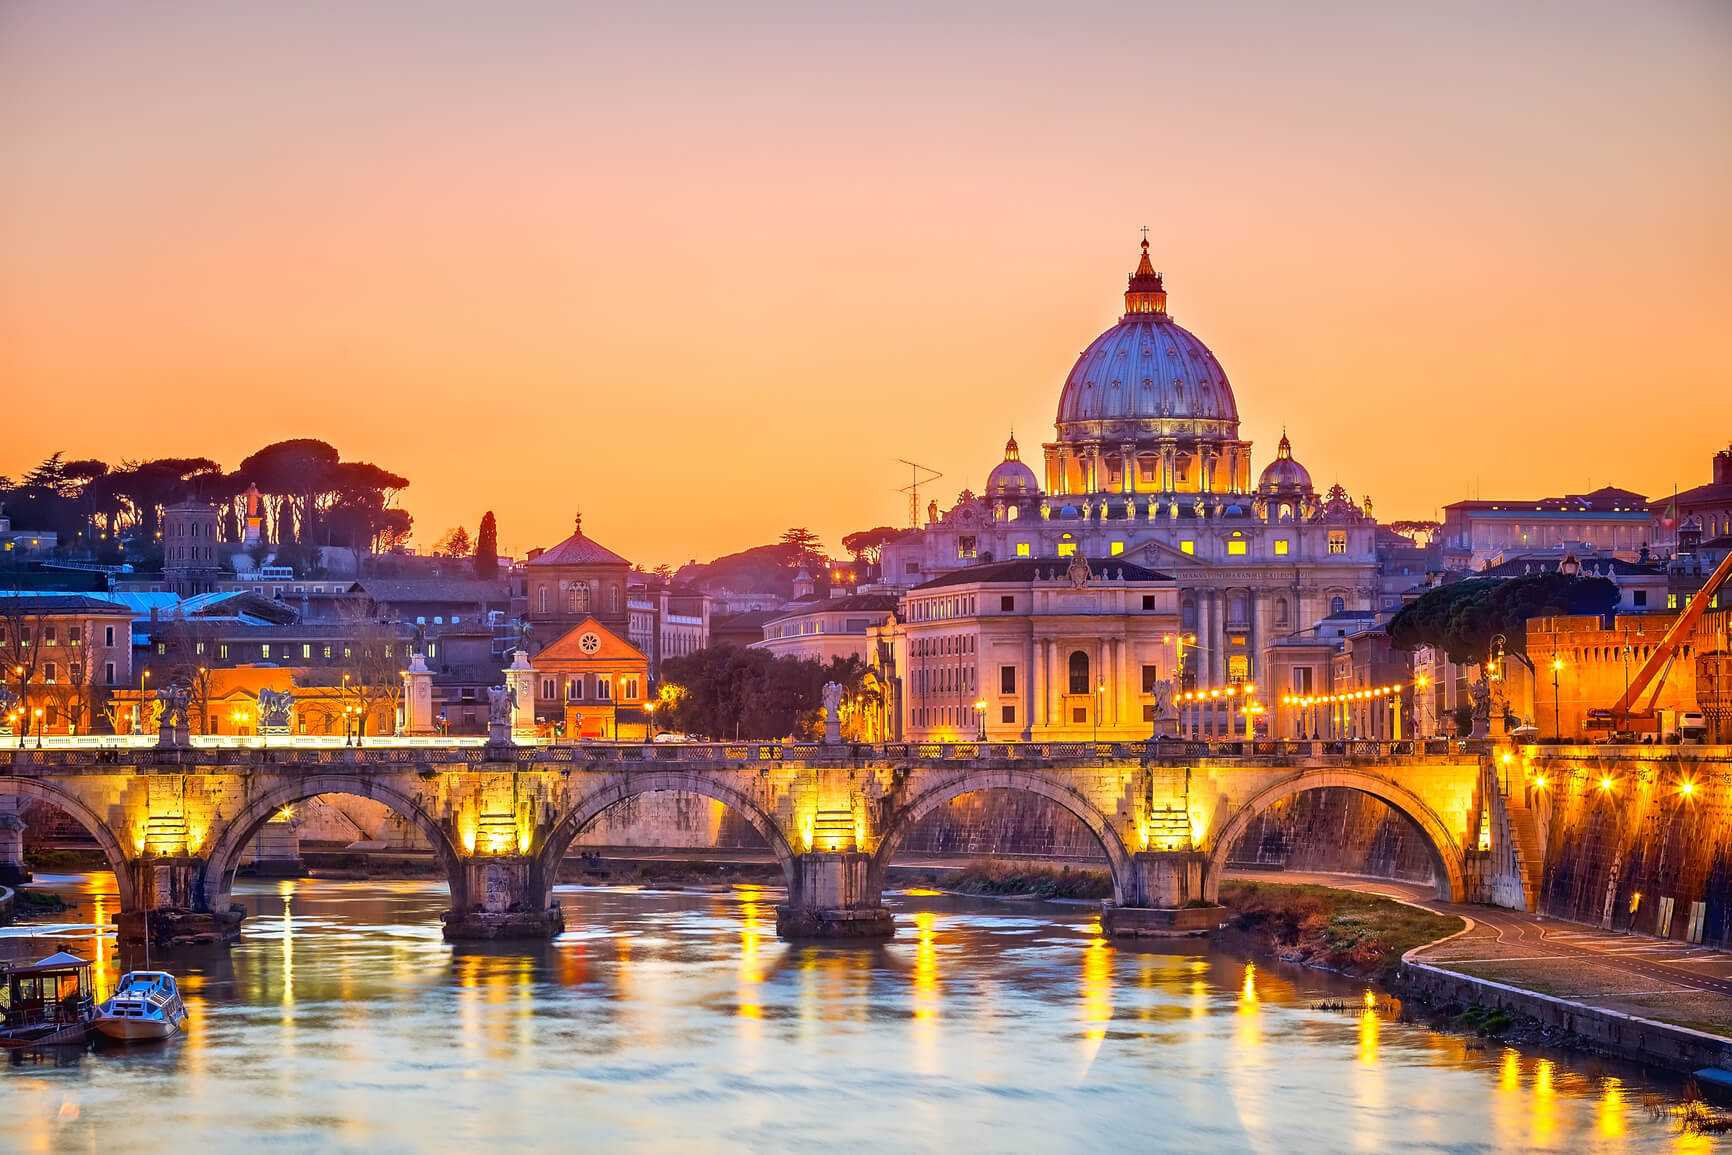 Flight deals from San Francisco to Rome, Italy | Secret Flying